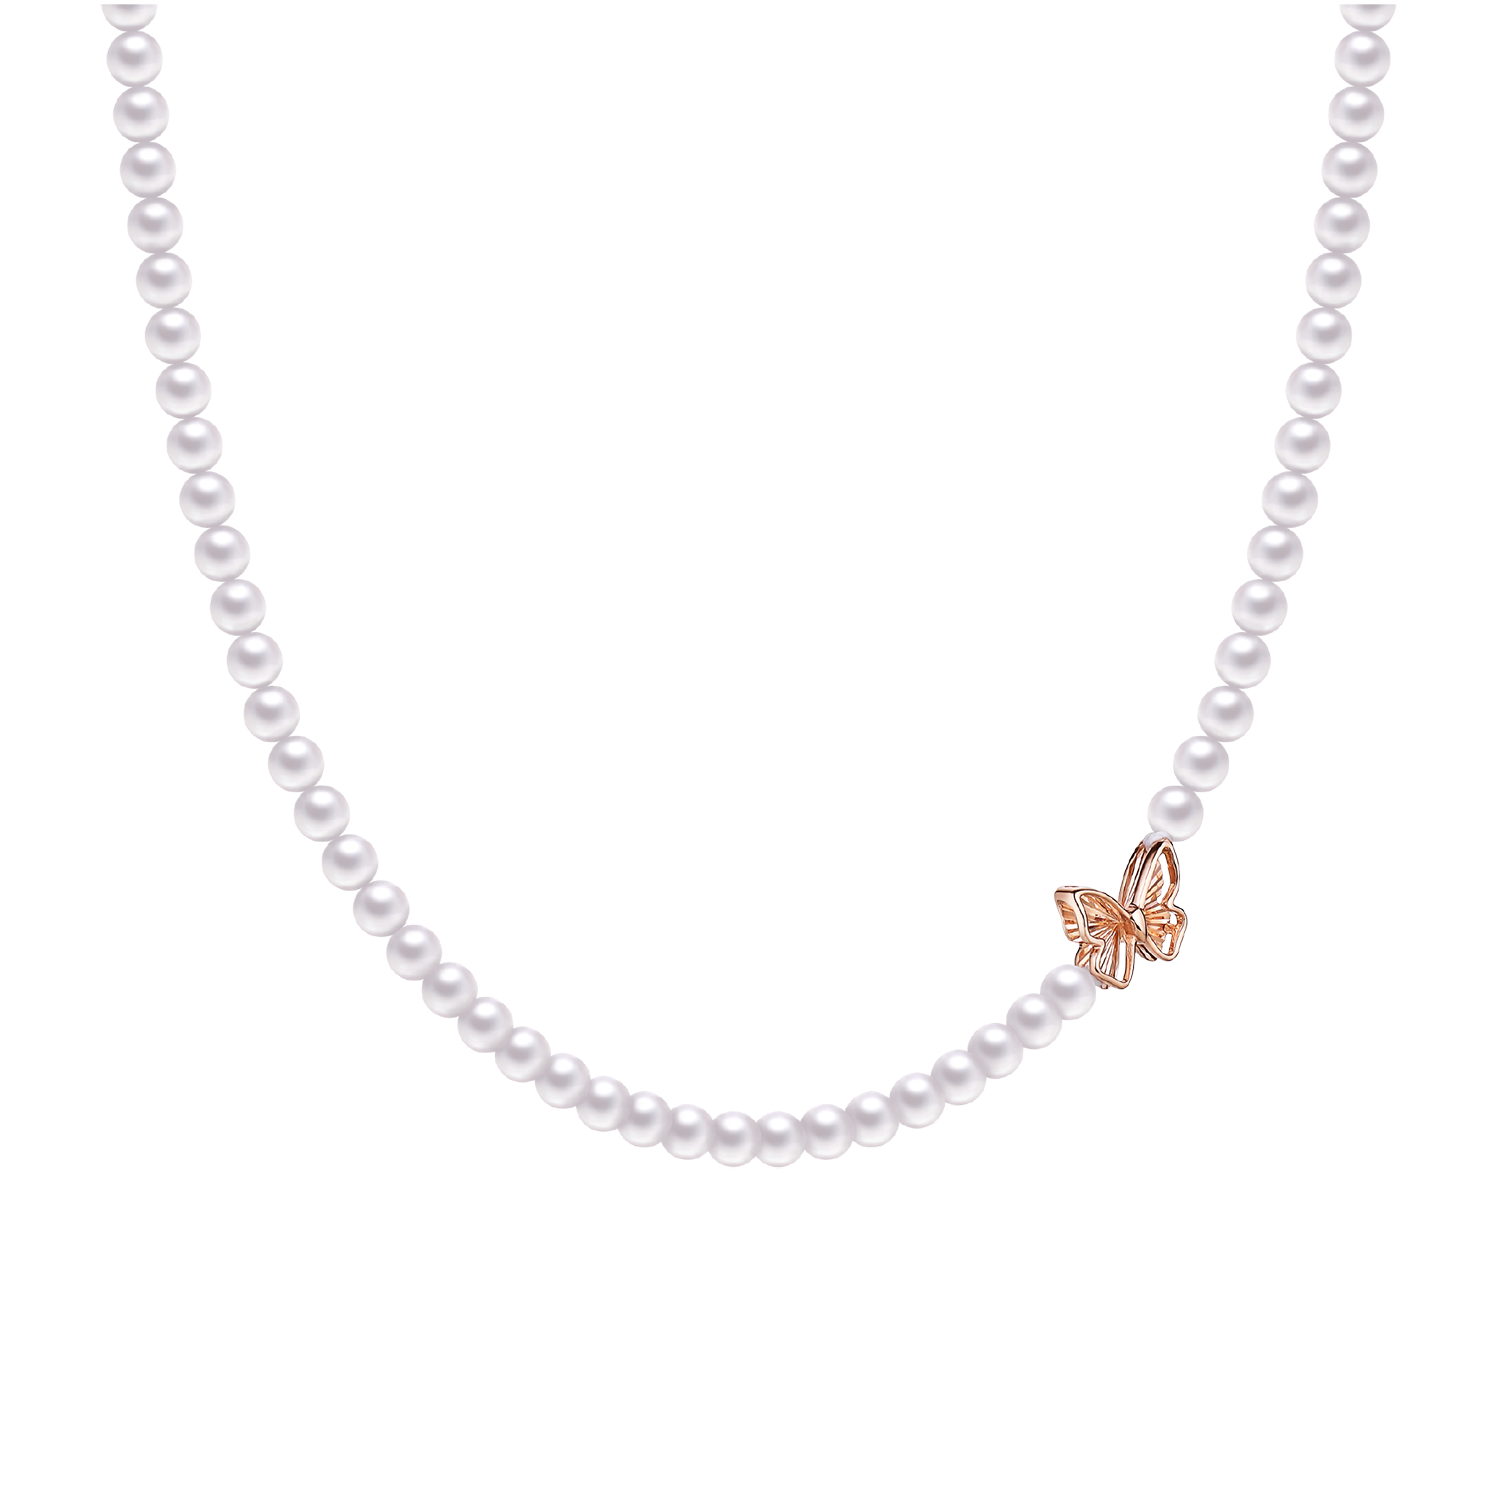 “Summer Trend”18K Gold Diamond Pearl Necklace 